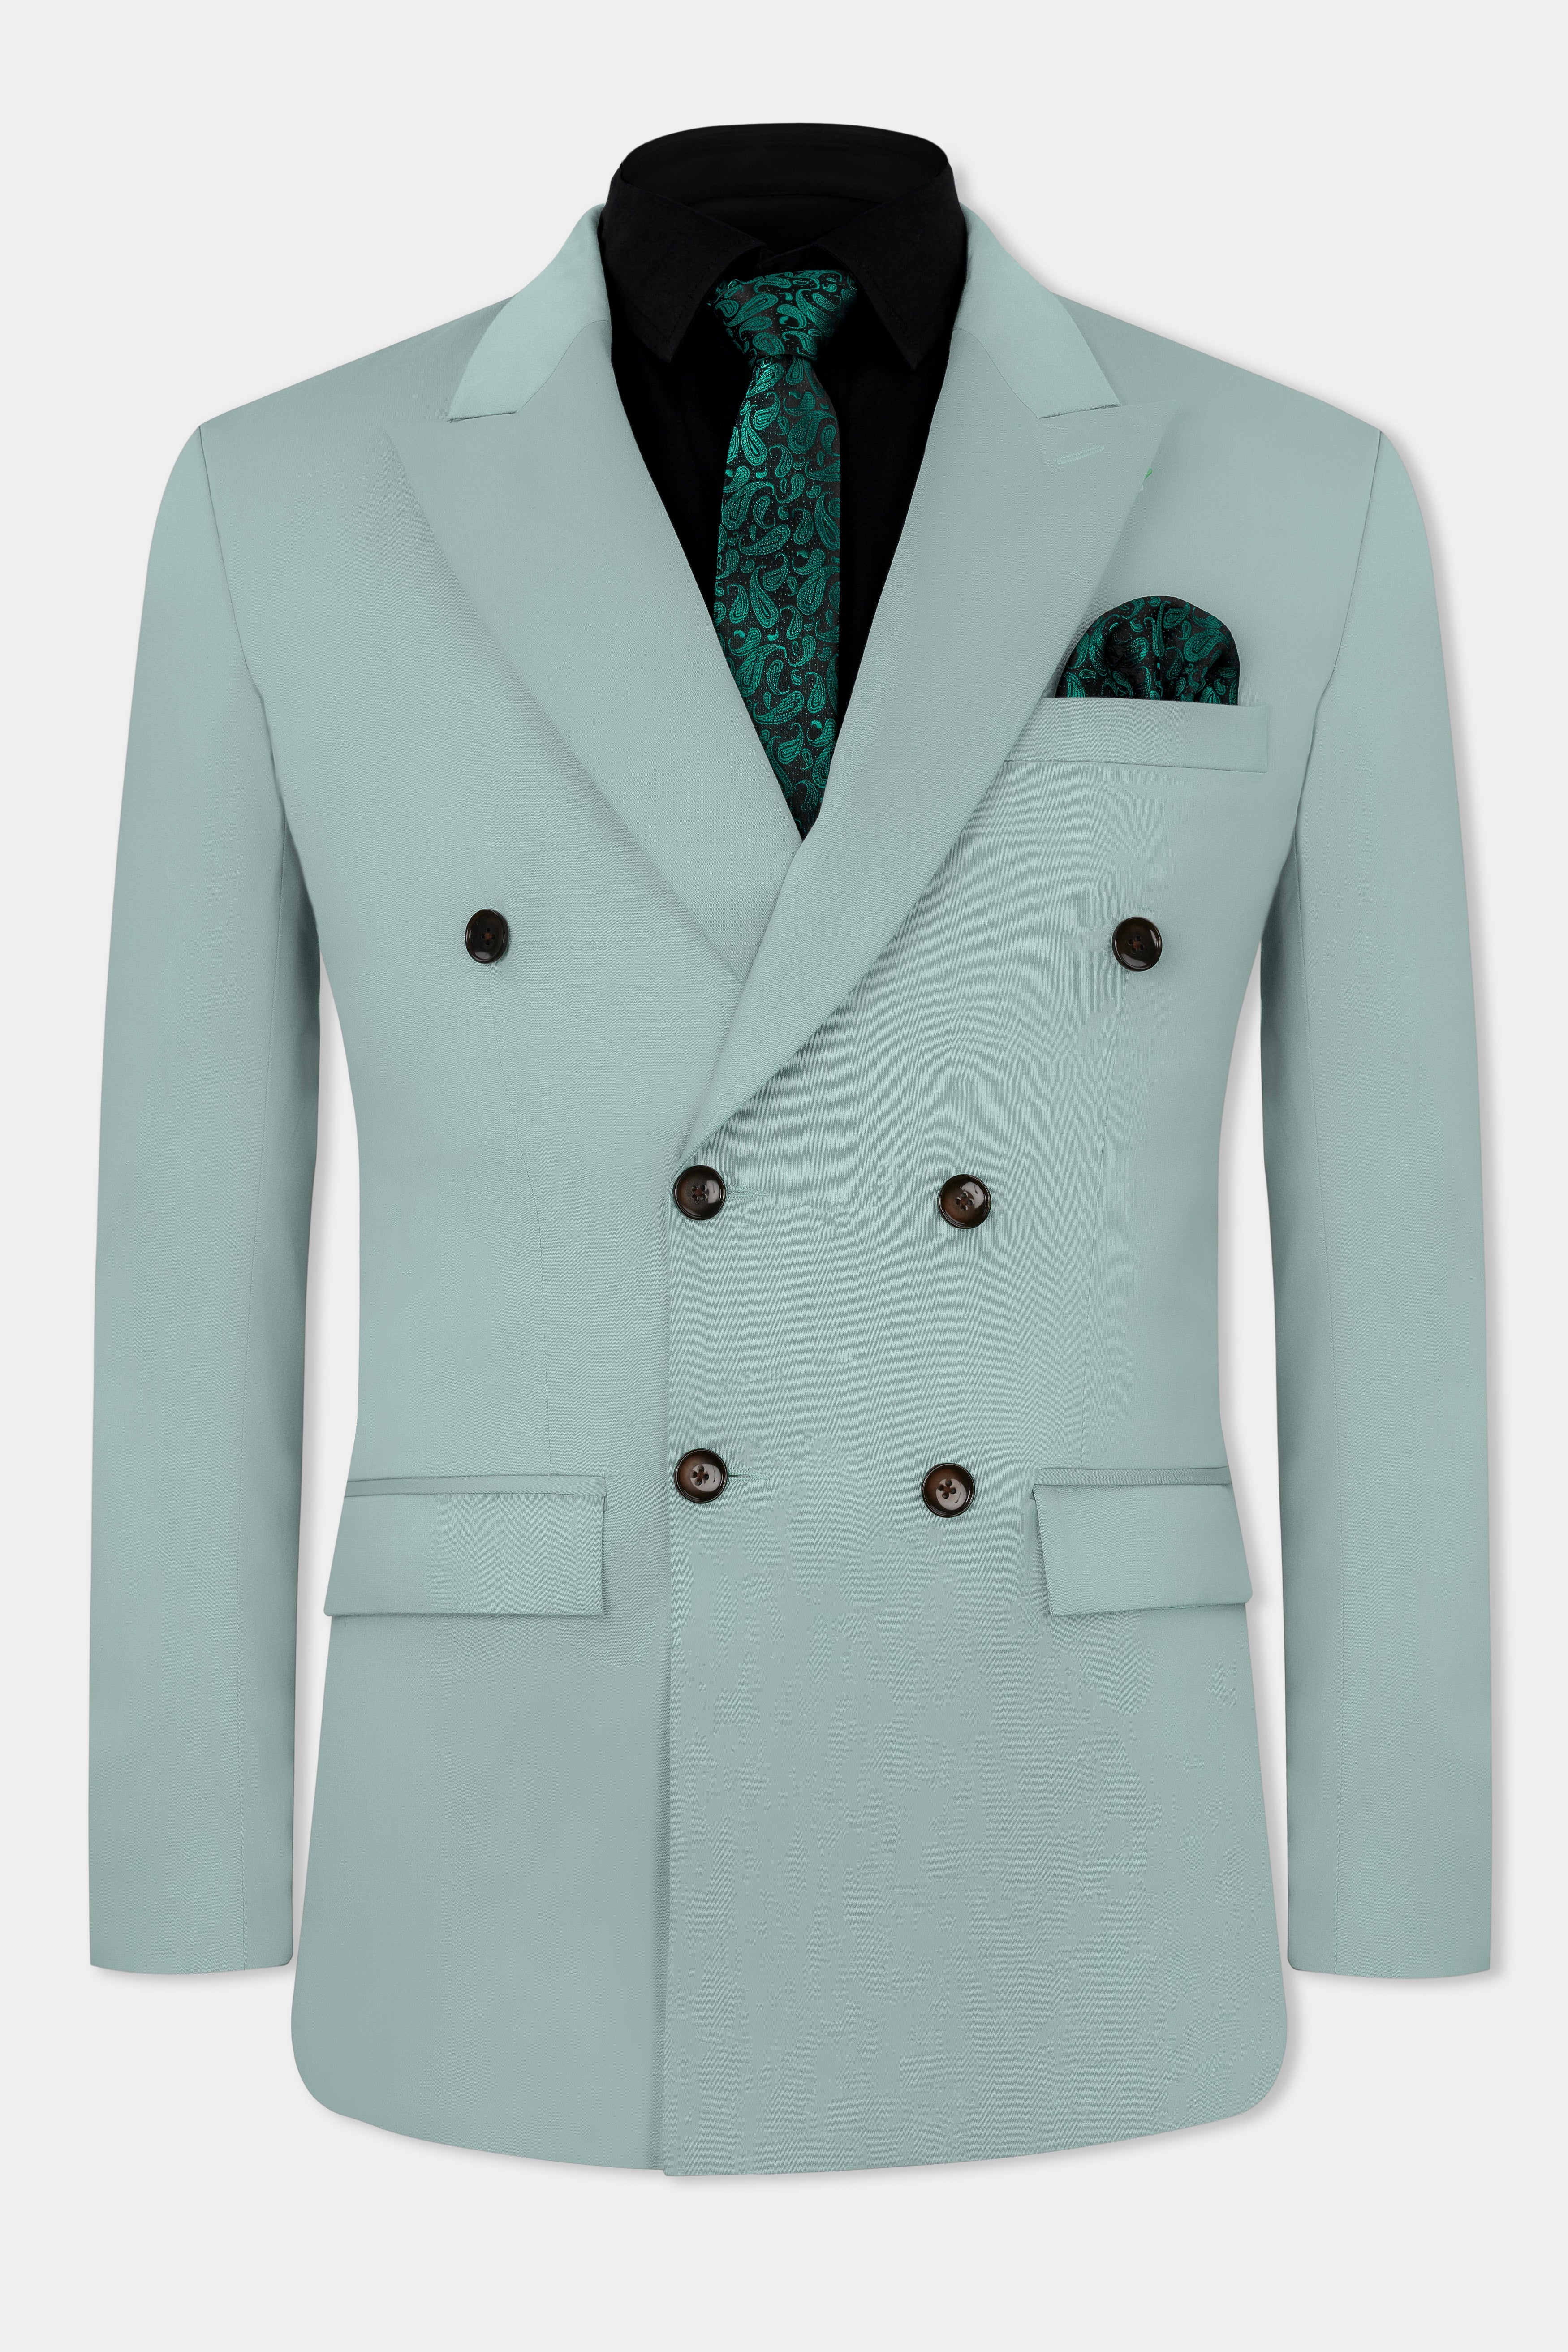 Edward Blue Double Breasted Premium Cotton Stretchable Traveler Blazer BL2788-DB-36, BL2788-DB-38, BL2788-DB-40, BL2788-DB-42, BL2788-DB-44, BL2788-DB-46, BL2788-DB-48, BL2788-DB-50, BL2788-DB-52, BL2788-DB-54, BL2788-DB-56, BL2788-DB-58, BL2788-DB-60